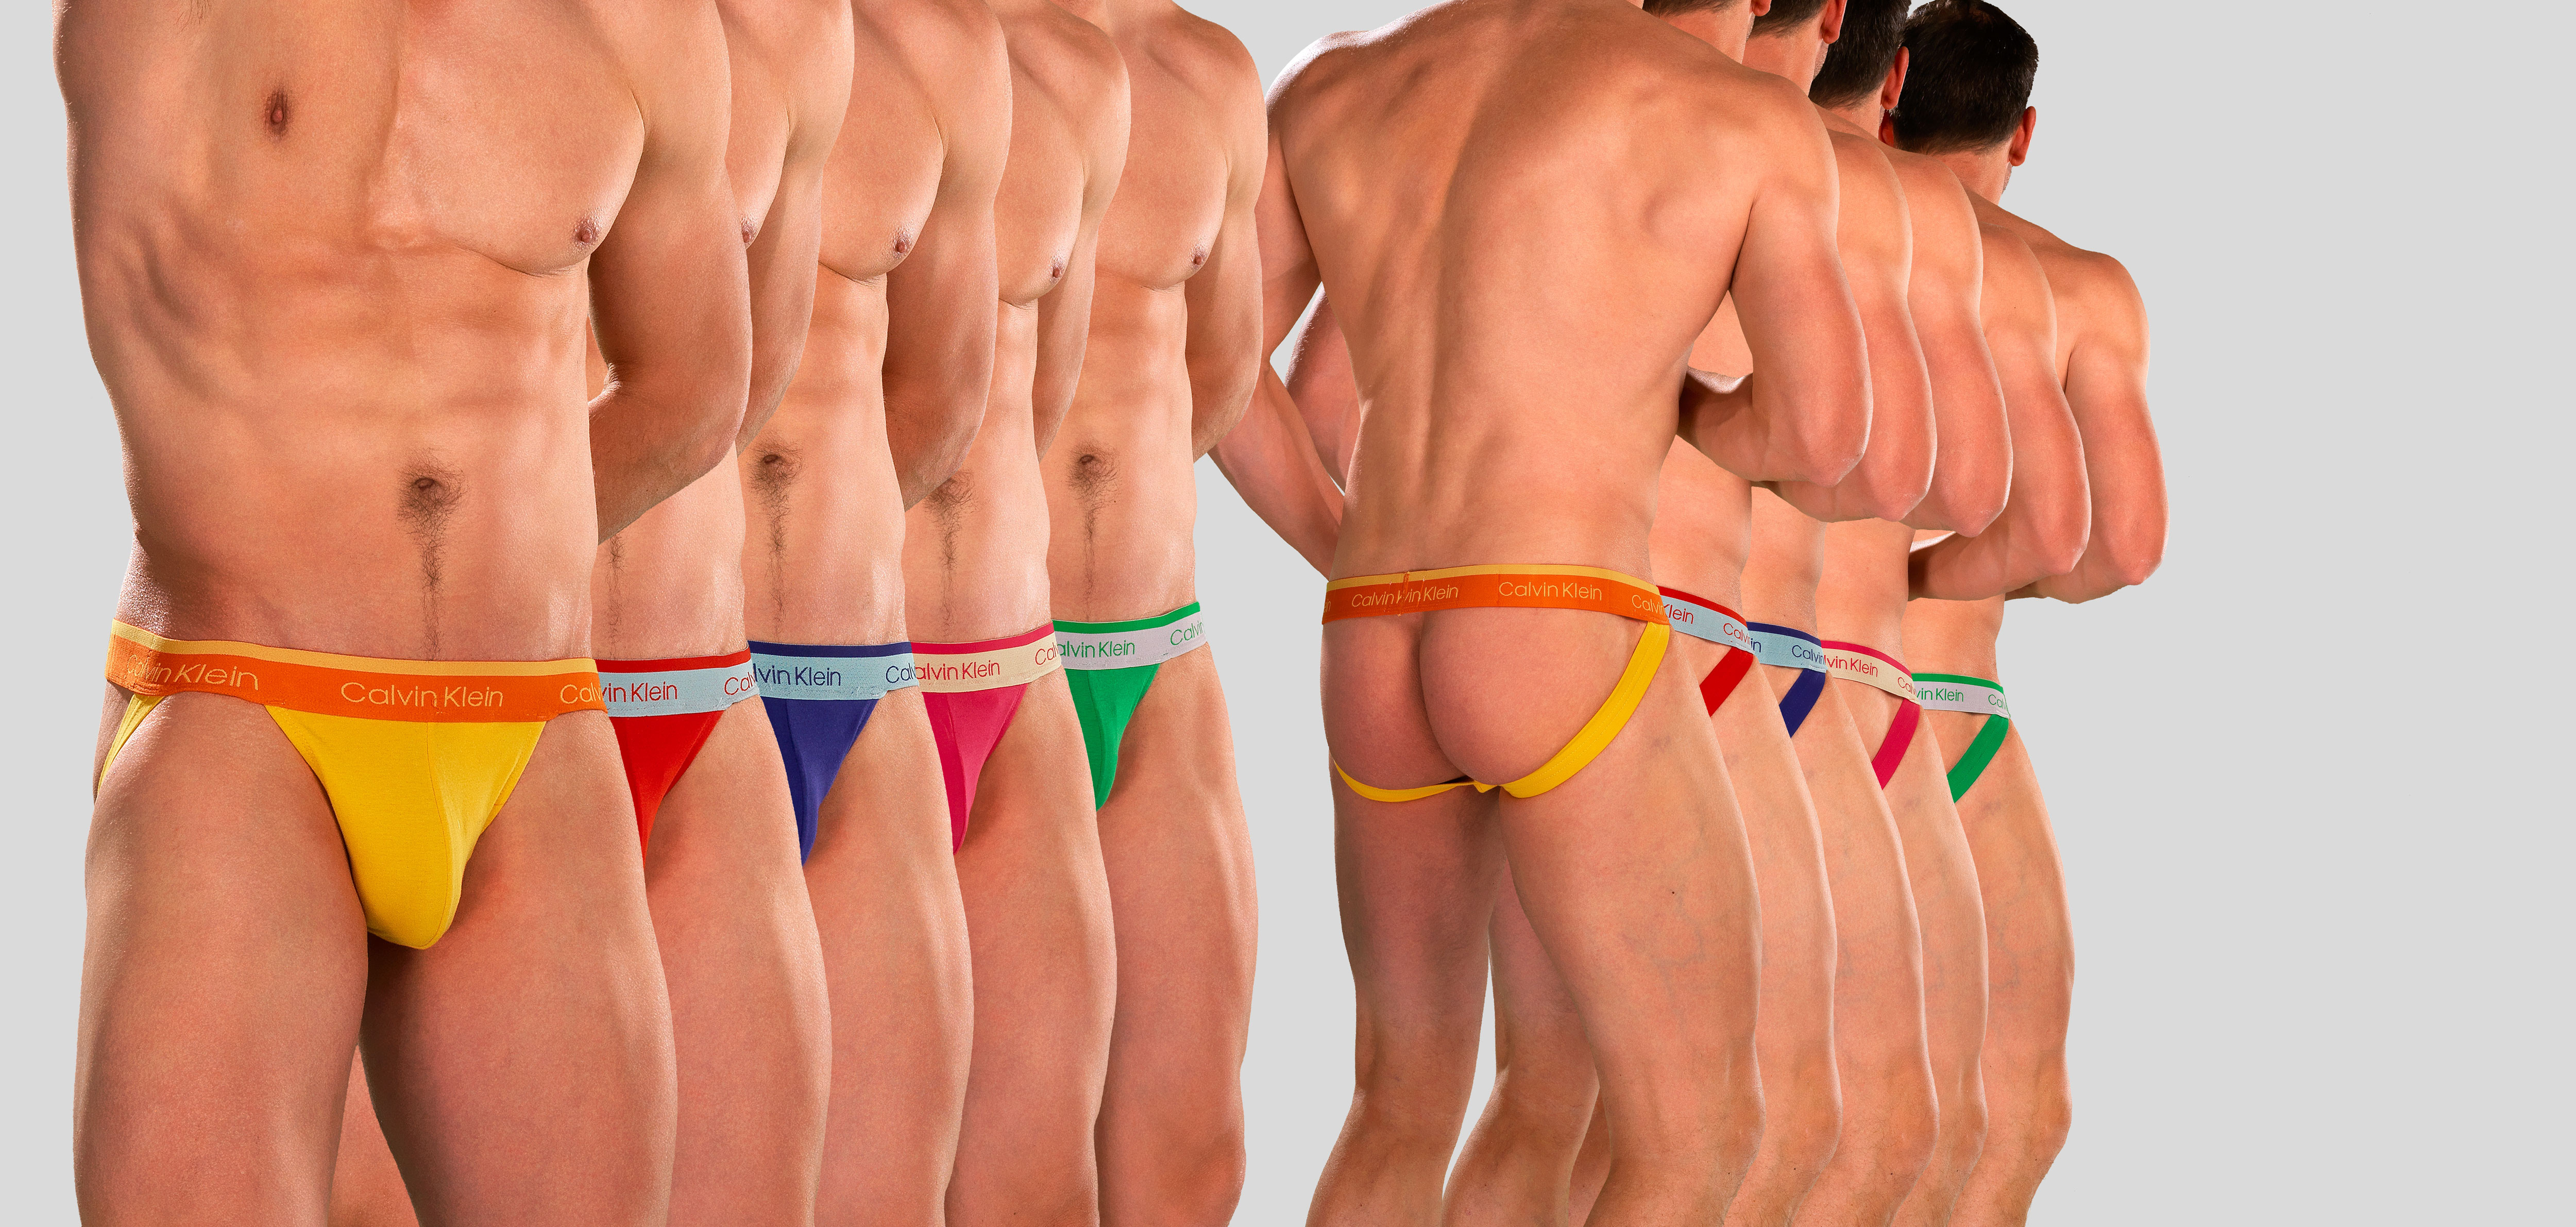 Calvin Klein The Pride Limited Edition Jockstrap 5-Pack NB2332A